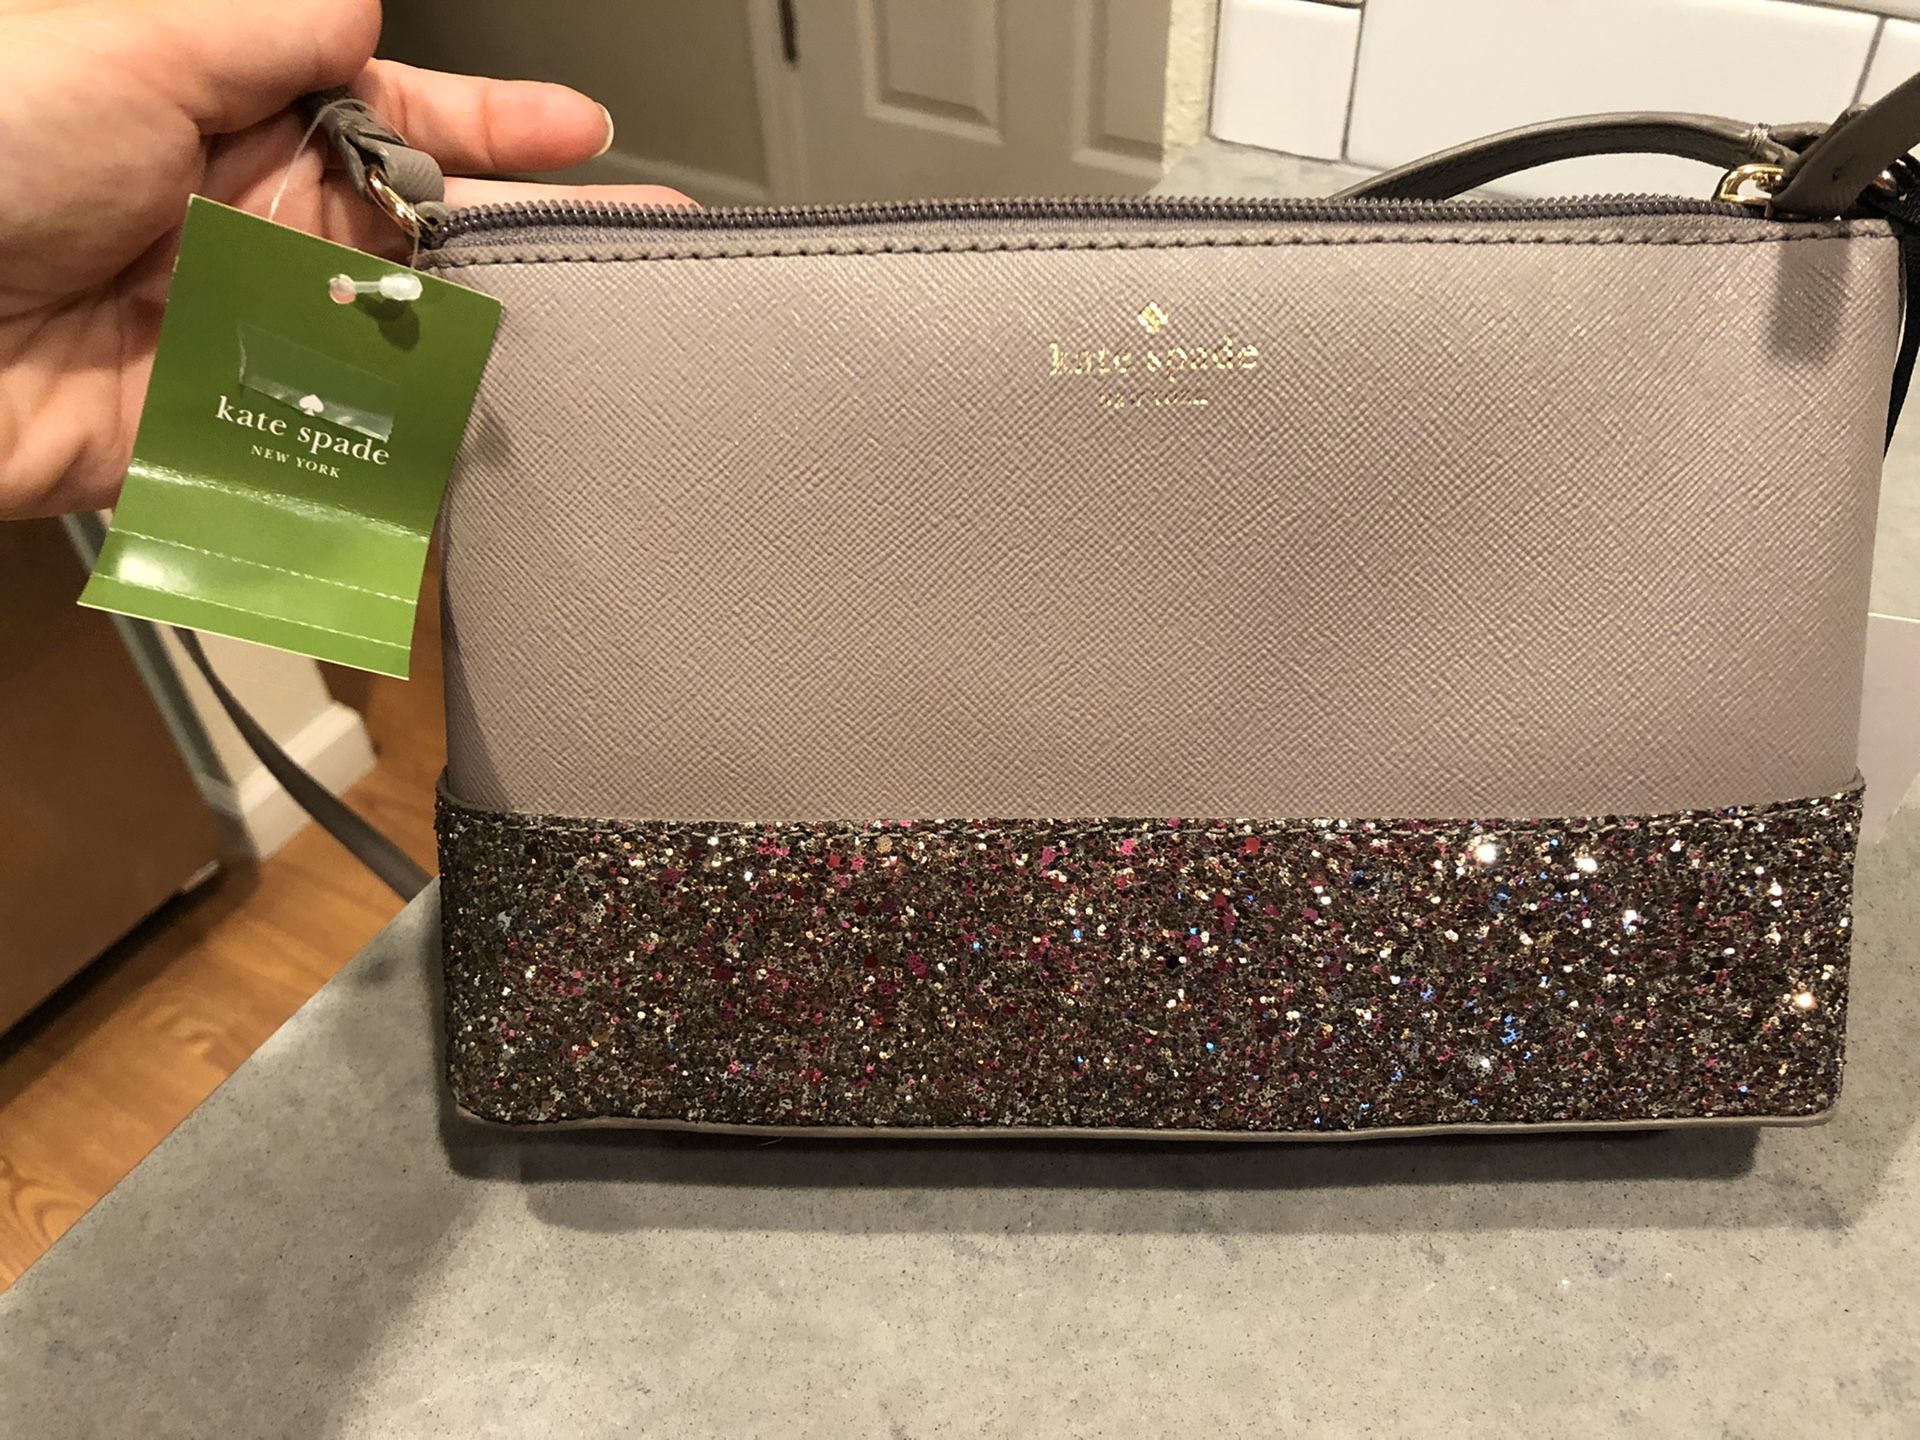 Brand new Kate Spade with tags